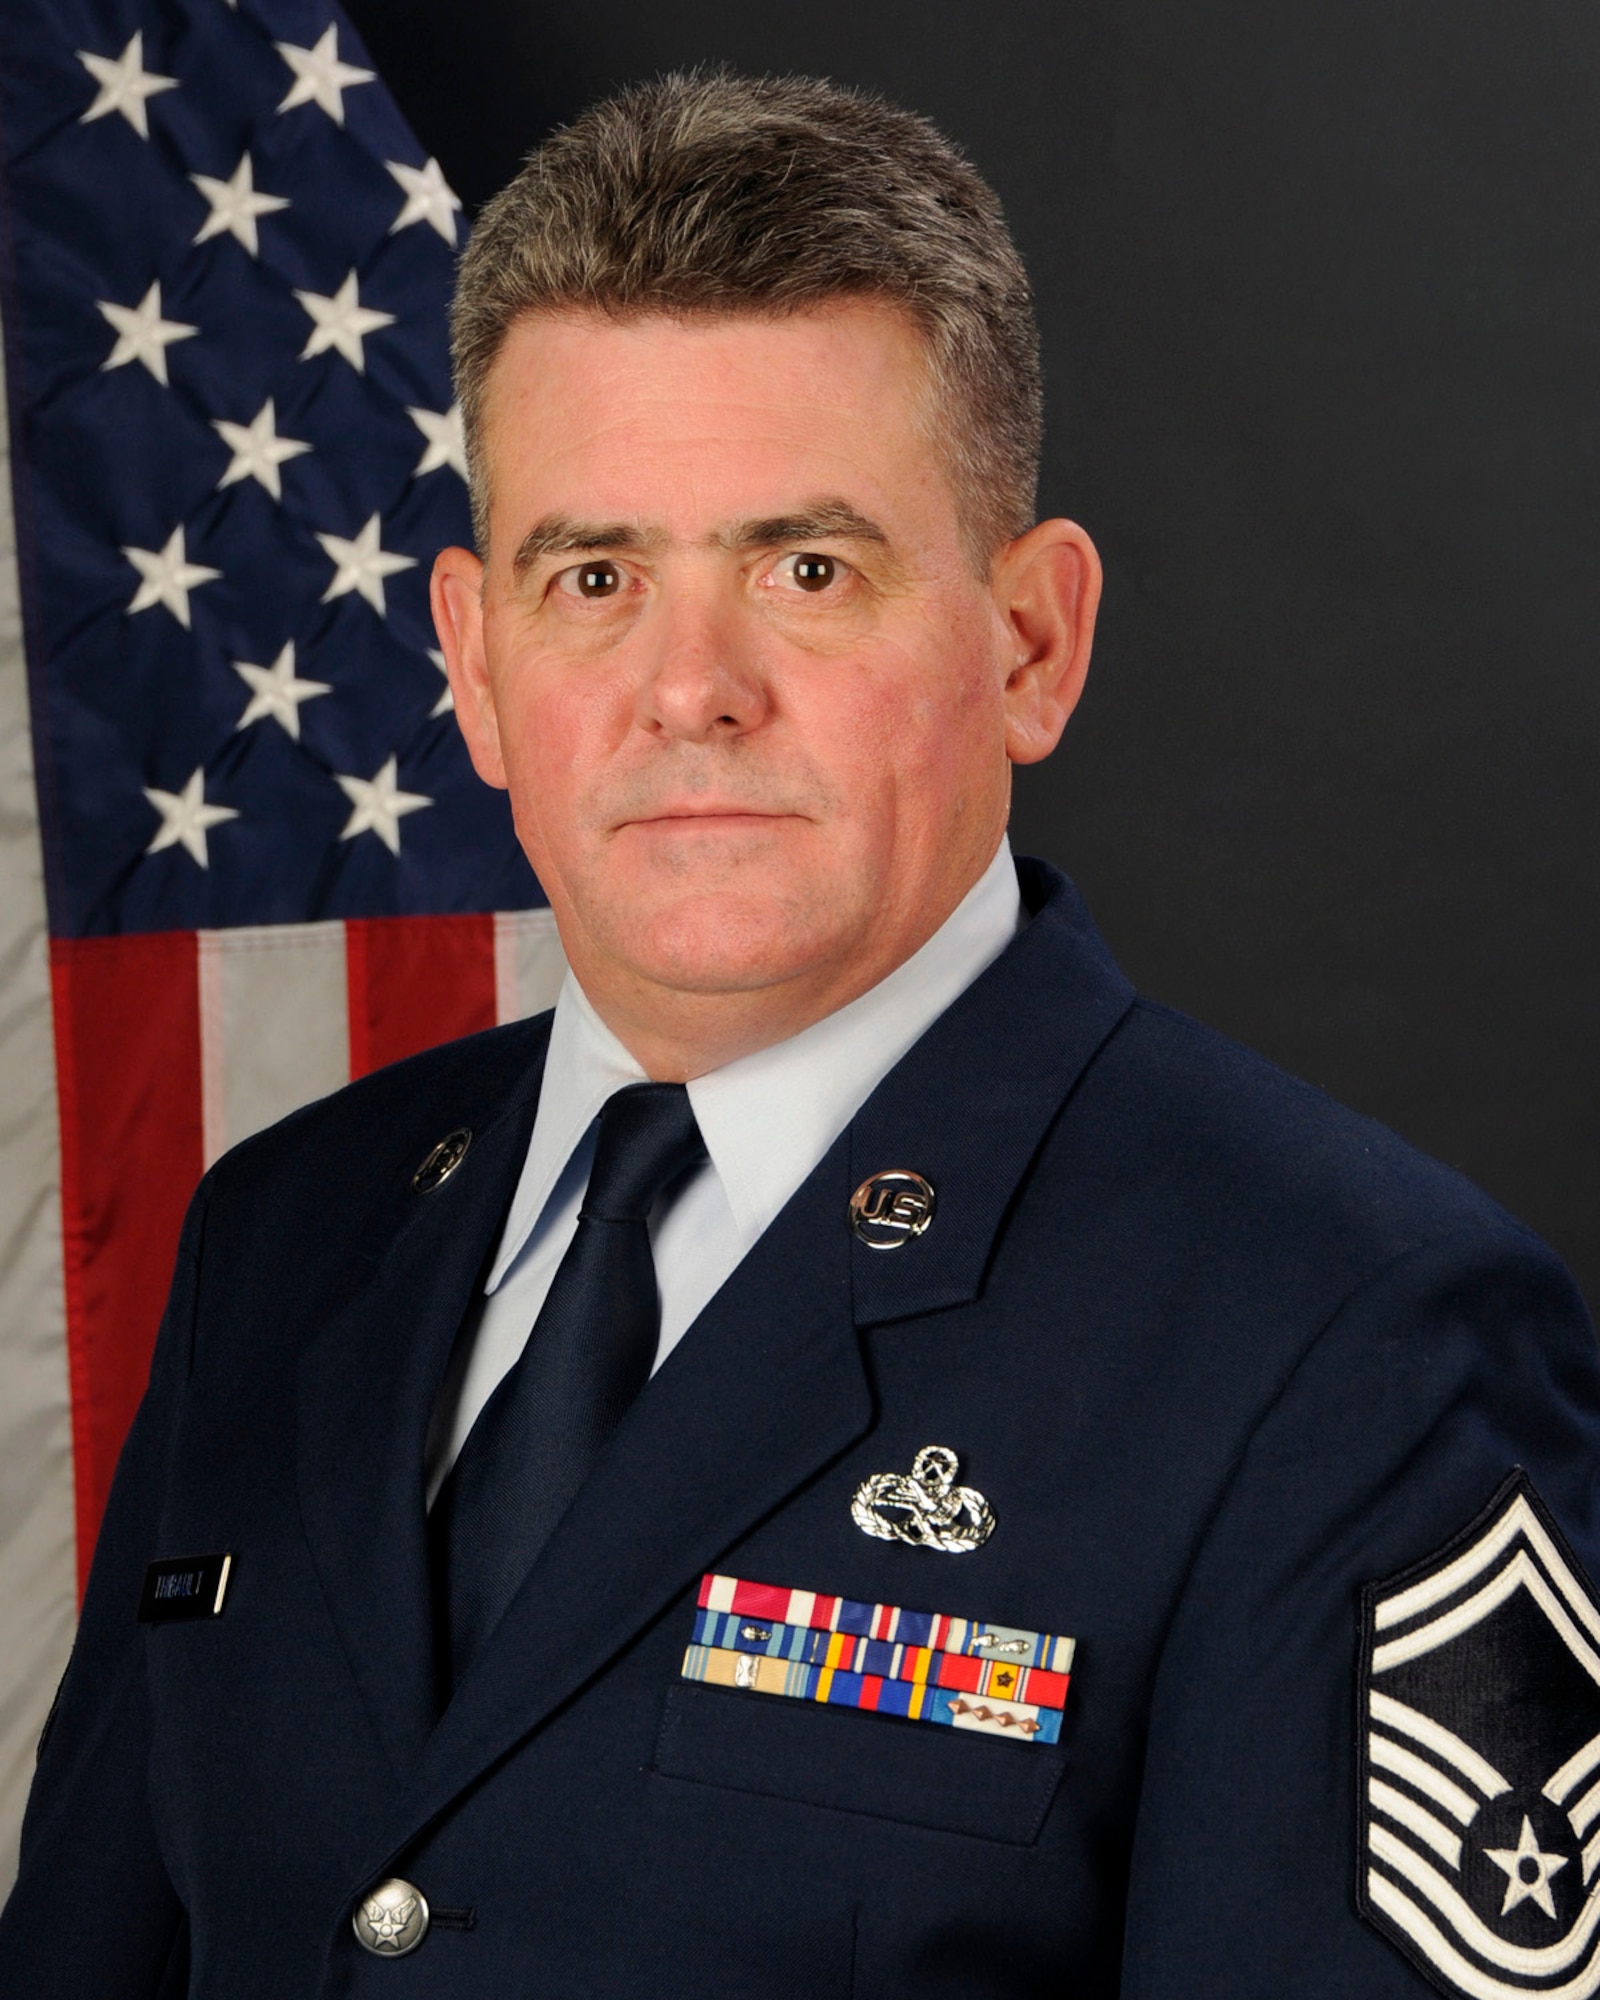 Senior Master Sgt. Robert Thibault, with the 169th Aircraft Maintenance Squadron at McEntire Joint National Guard Base, S.C., poses for his portrait on Jan. 13, 2013. Senior Master Sgt. Thibault was selected as the (Traditional) 169th Fighter Wing Senior Non Commissioned Officer of the year for 2012.(National Guard photo by Tech. Sgt. Caycee Watson/Released)